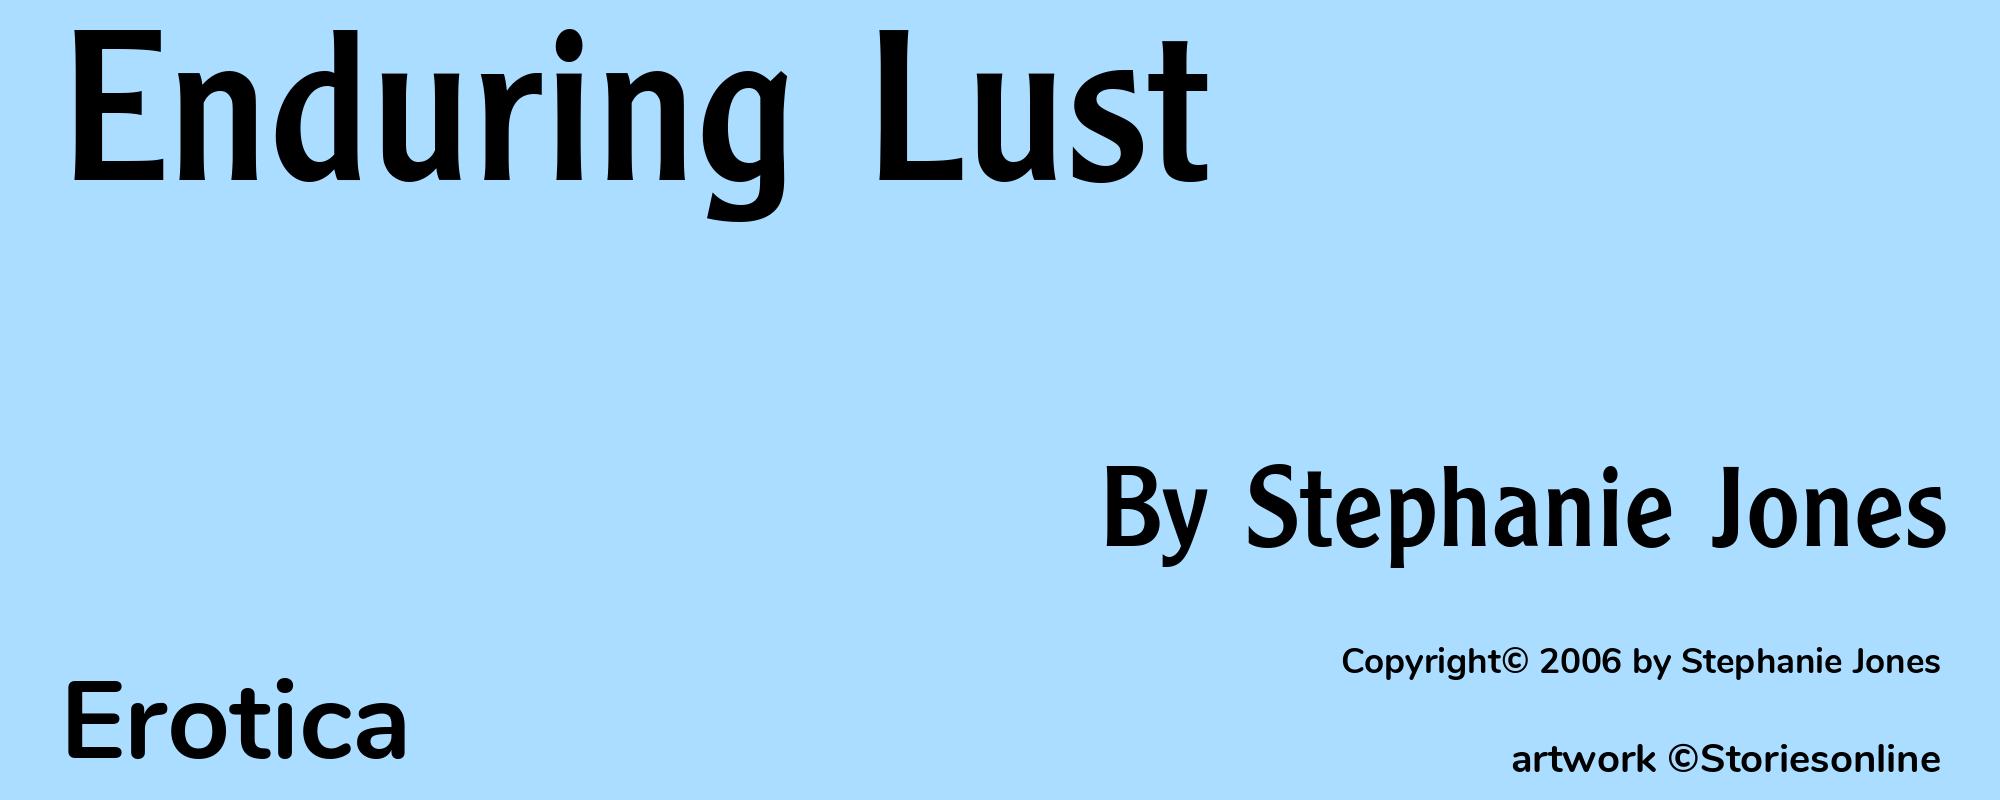 Enduring Lust - Cover